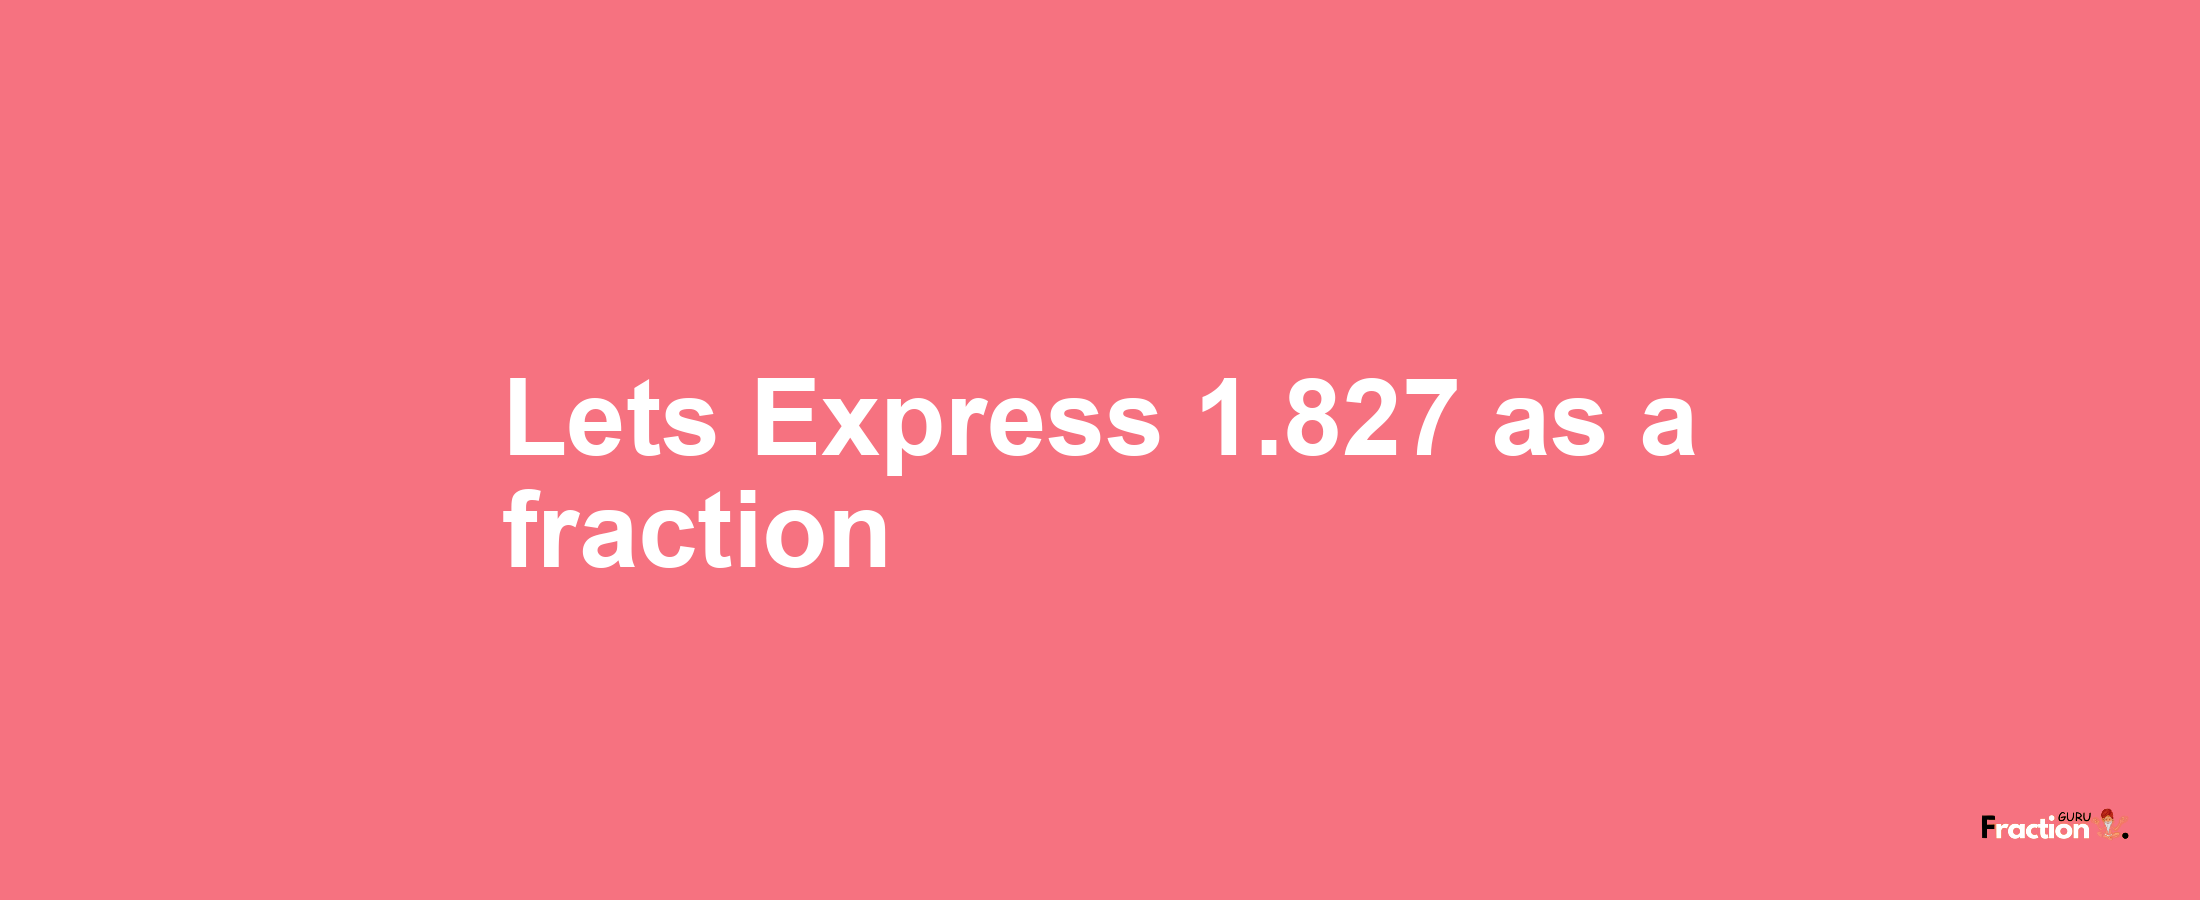 Lets Express 1.827 as afraction